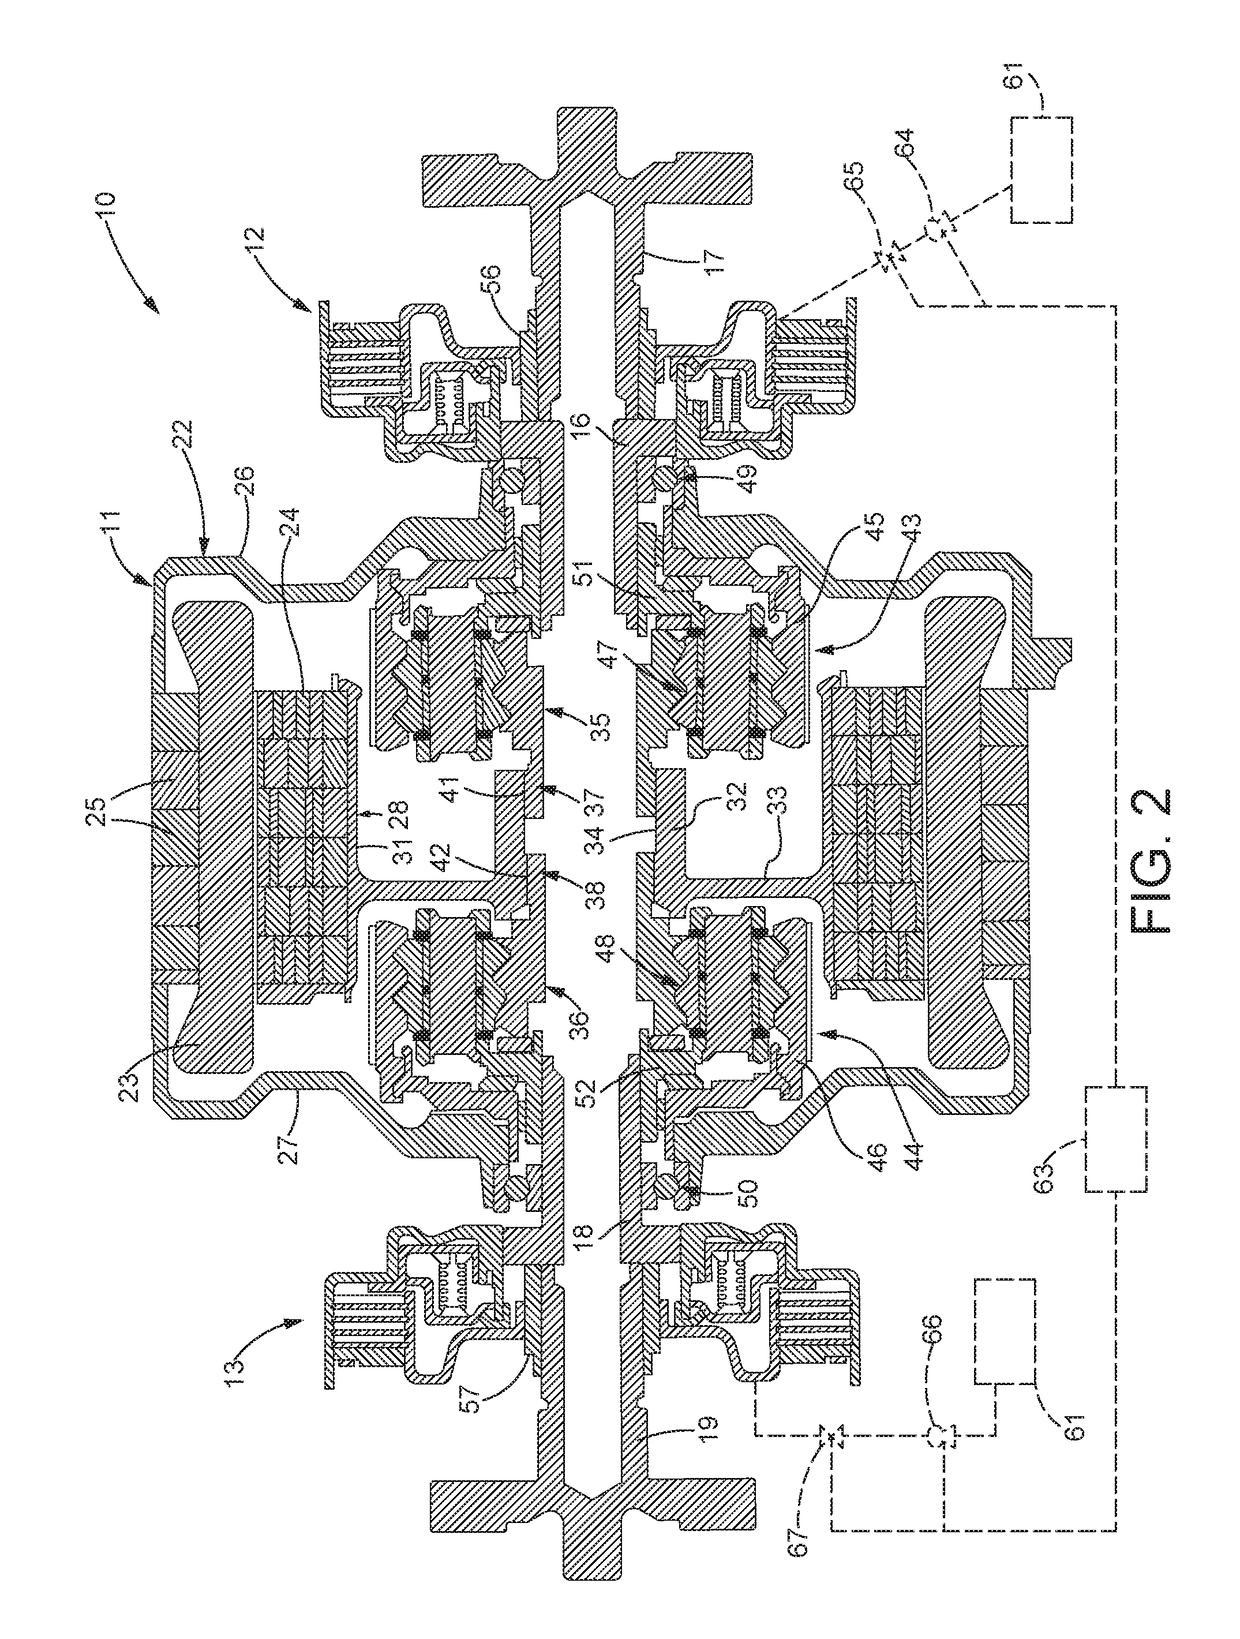 Electric motor with coaxial clutch packs that provide differential and torque vectoring